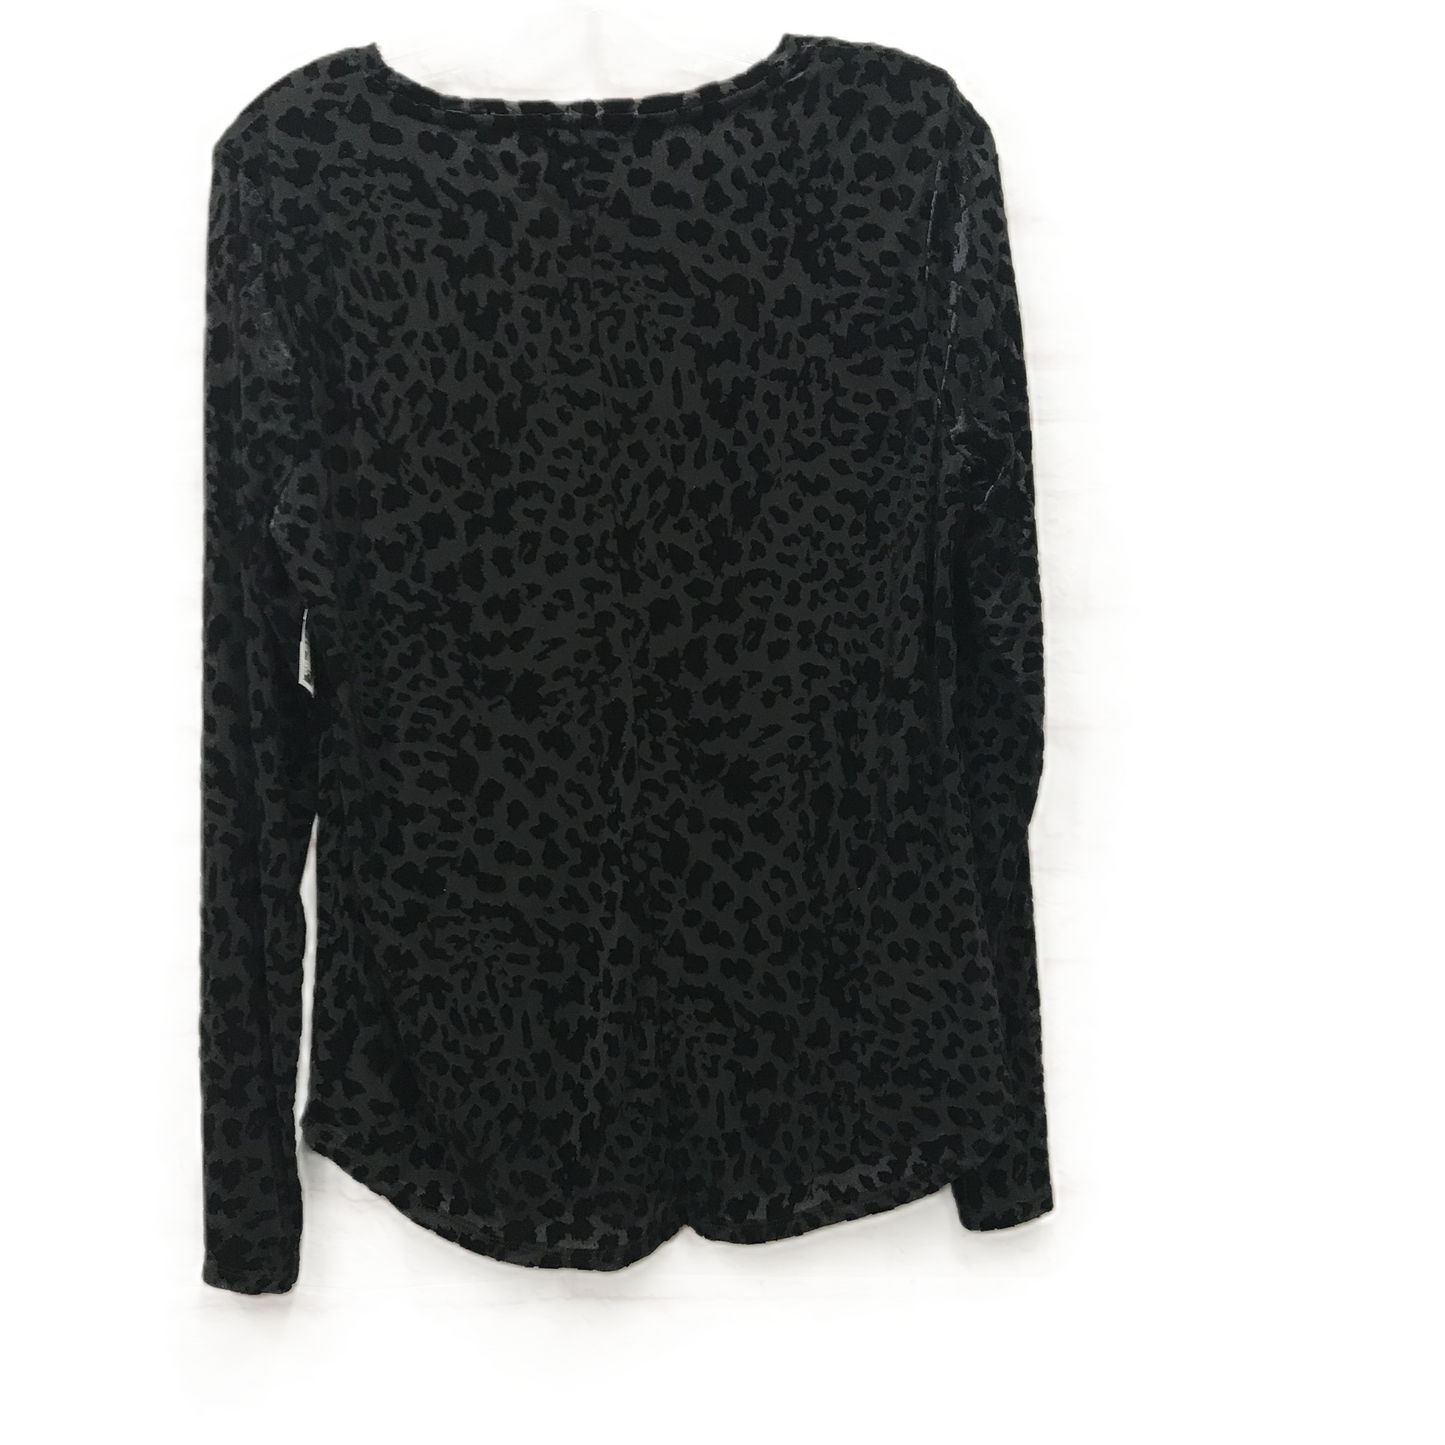 Black Top Long Sleeve By Simply Vera, Size: M